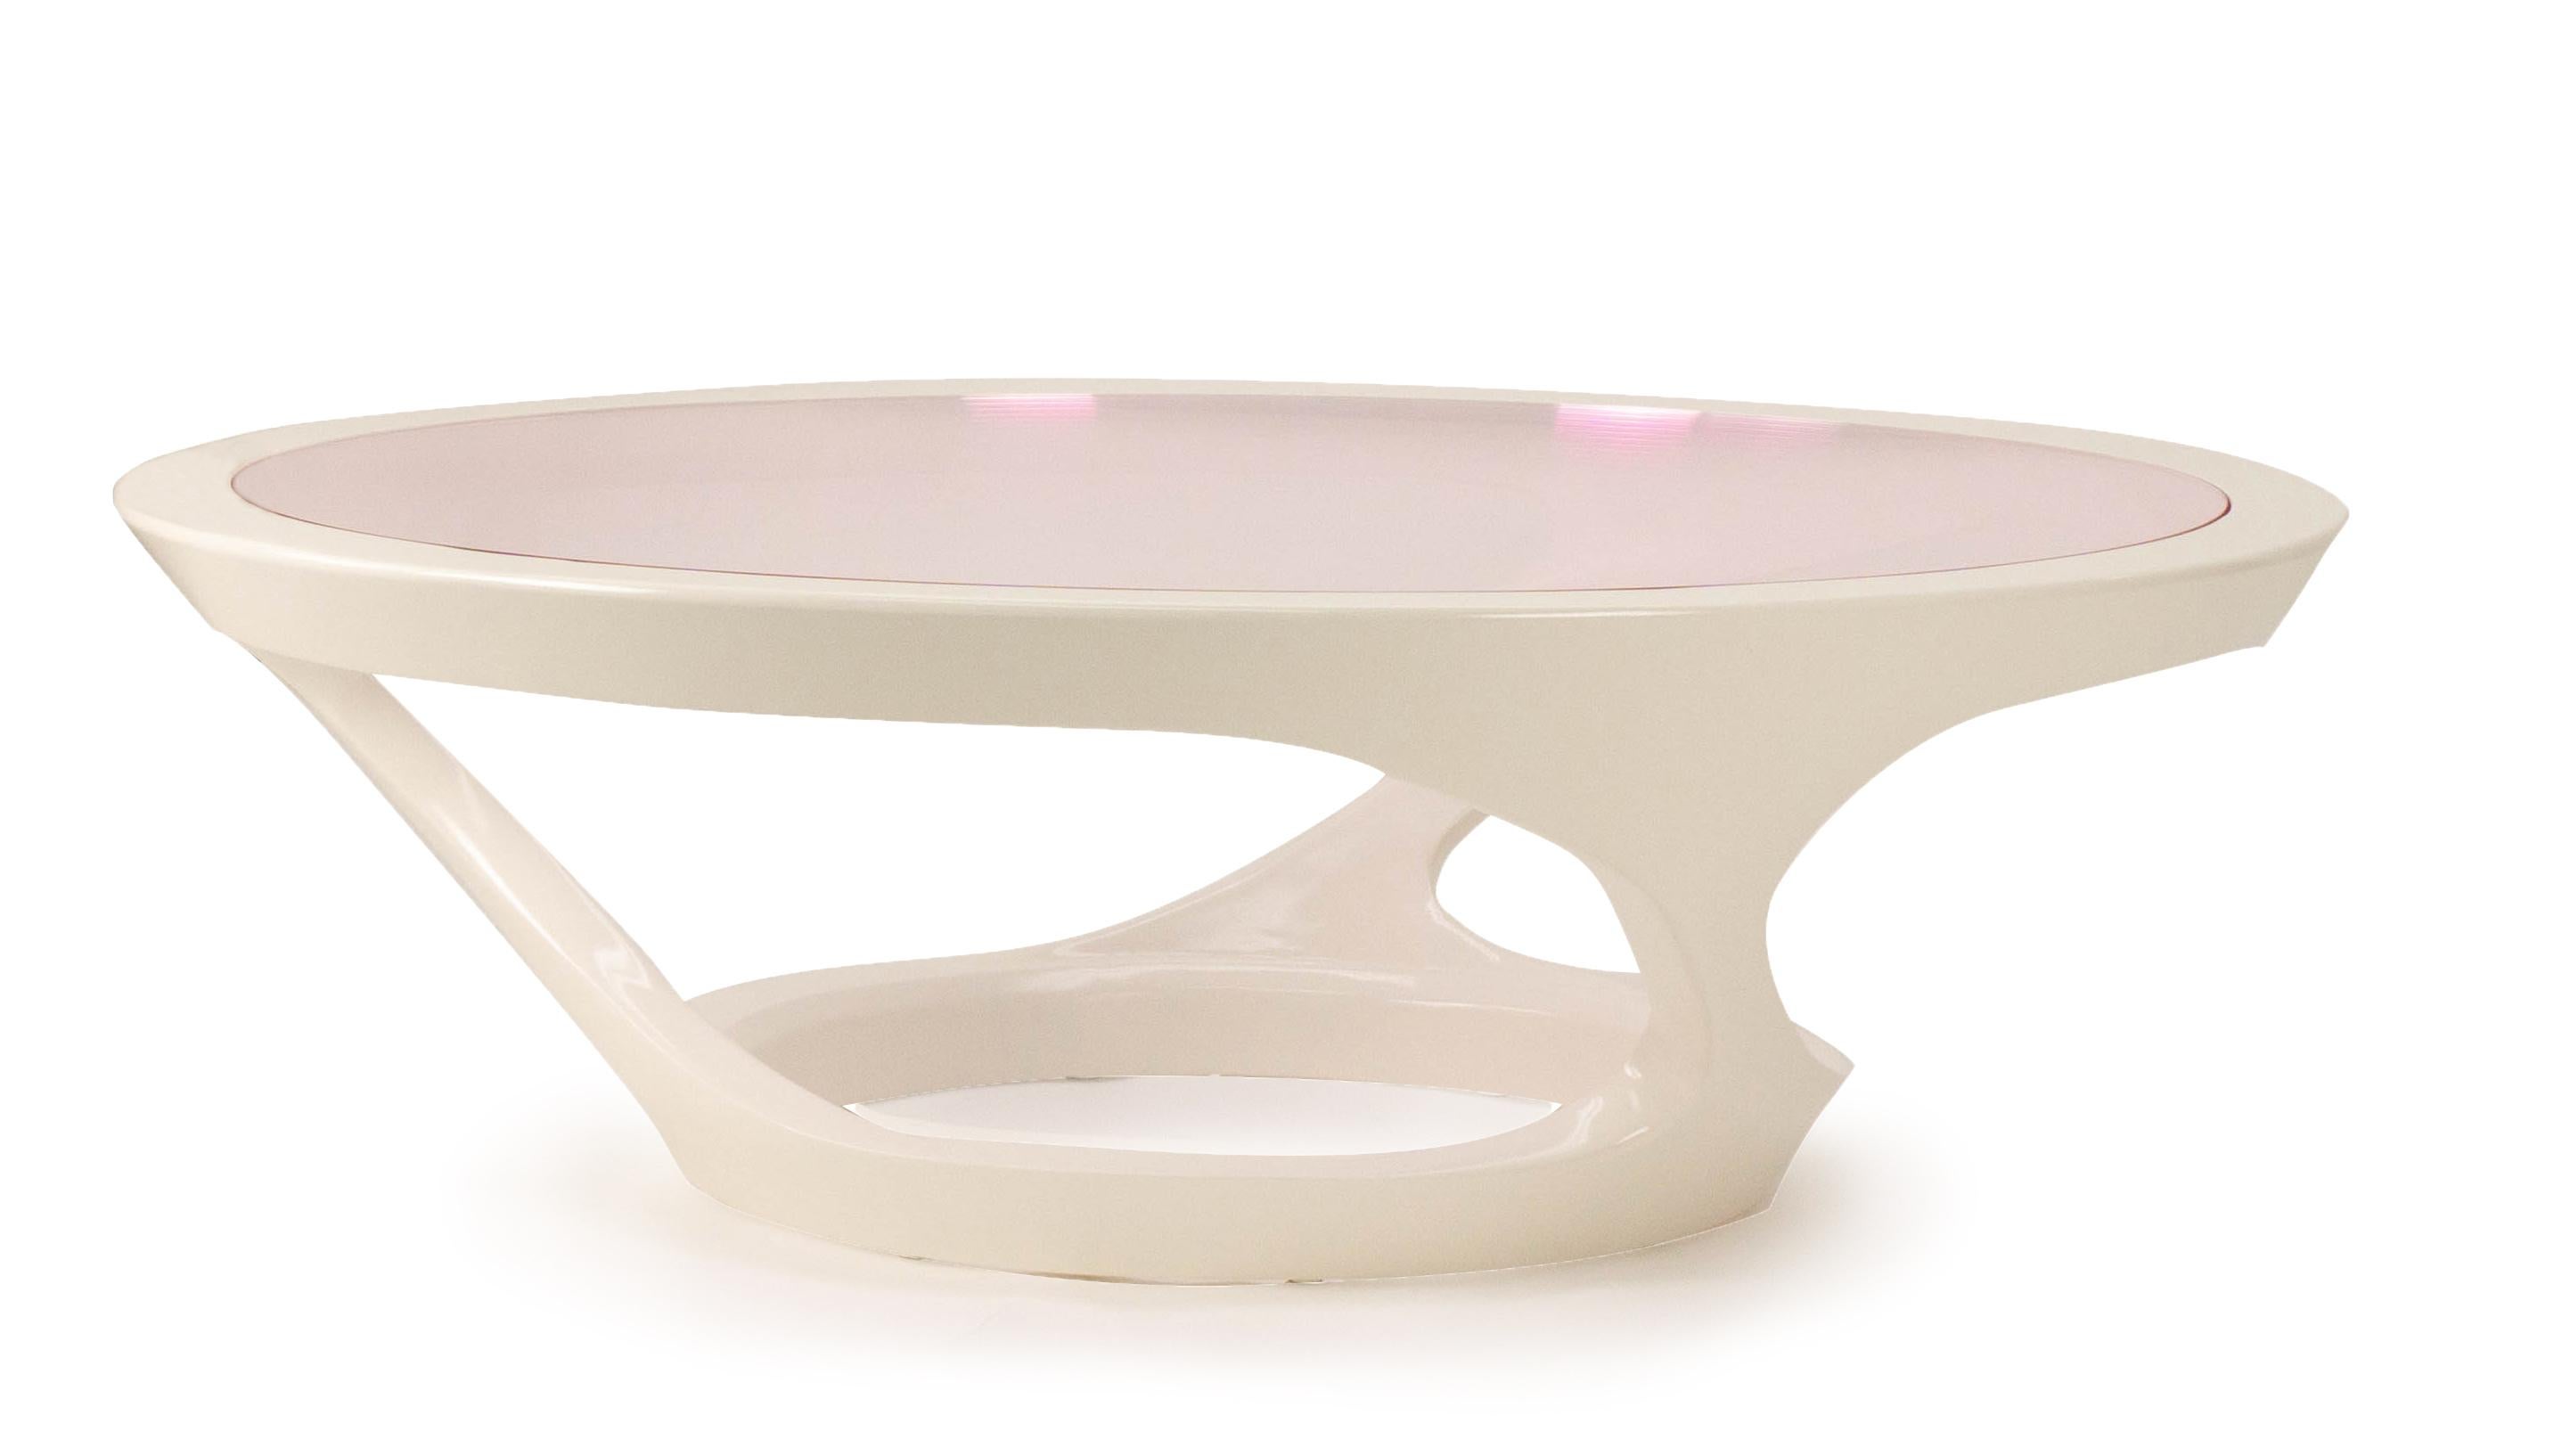 Our Alkahest coffee table is a round table with a carved base lacquered in white with a pink Lucite top. Made in our Connecticut workshop. Size, Lucite and base color are customizable.

Measurements:
53